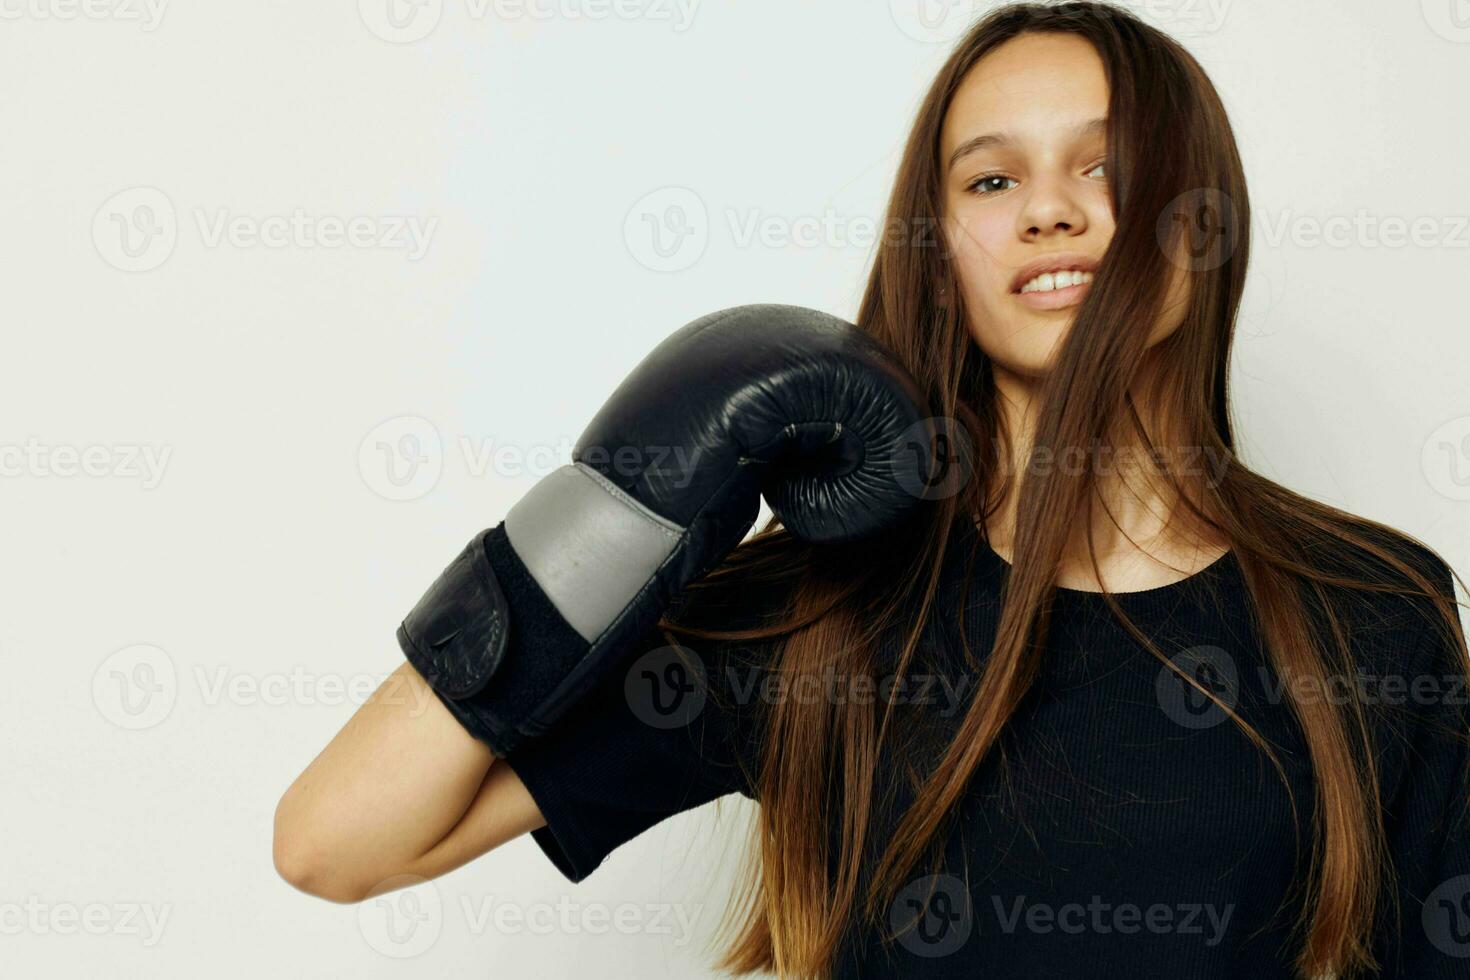 young beautiful woman in black sports uniform boxing gloves posing isolated background photo